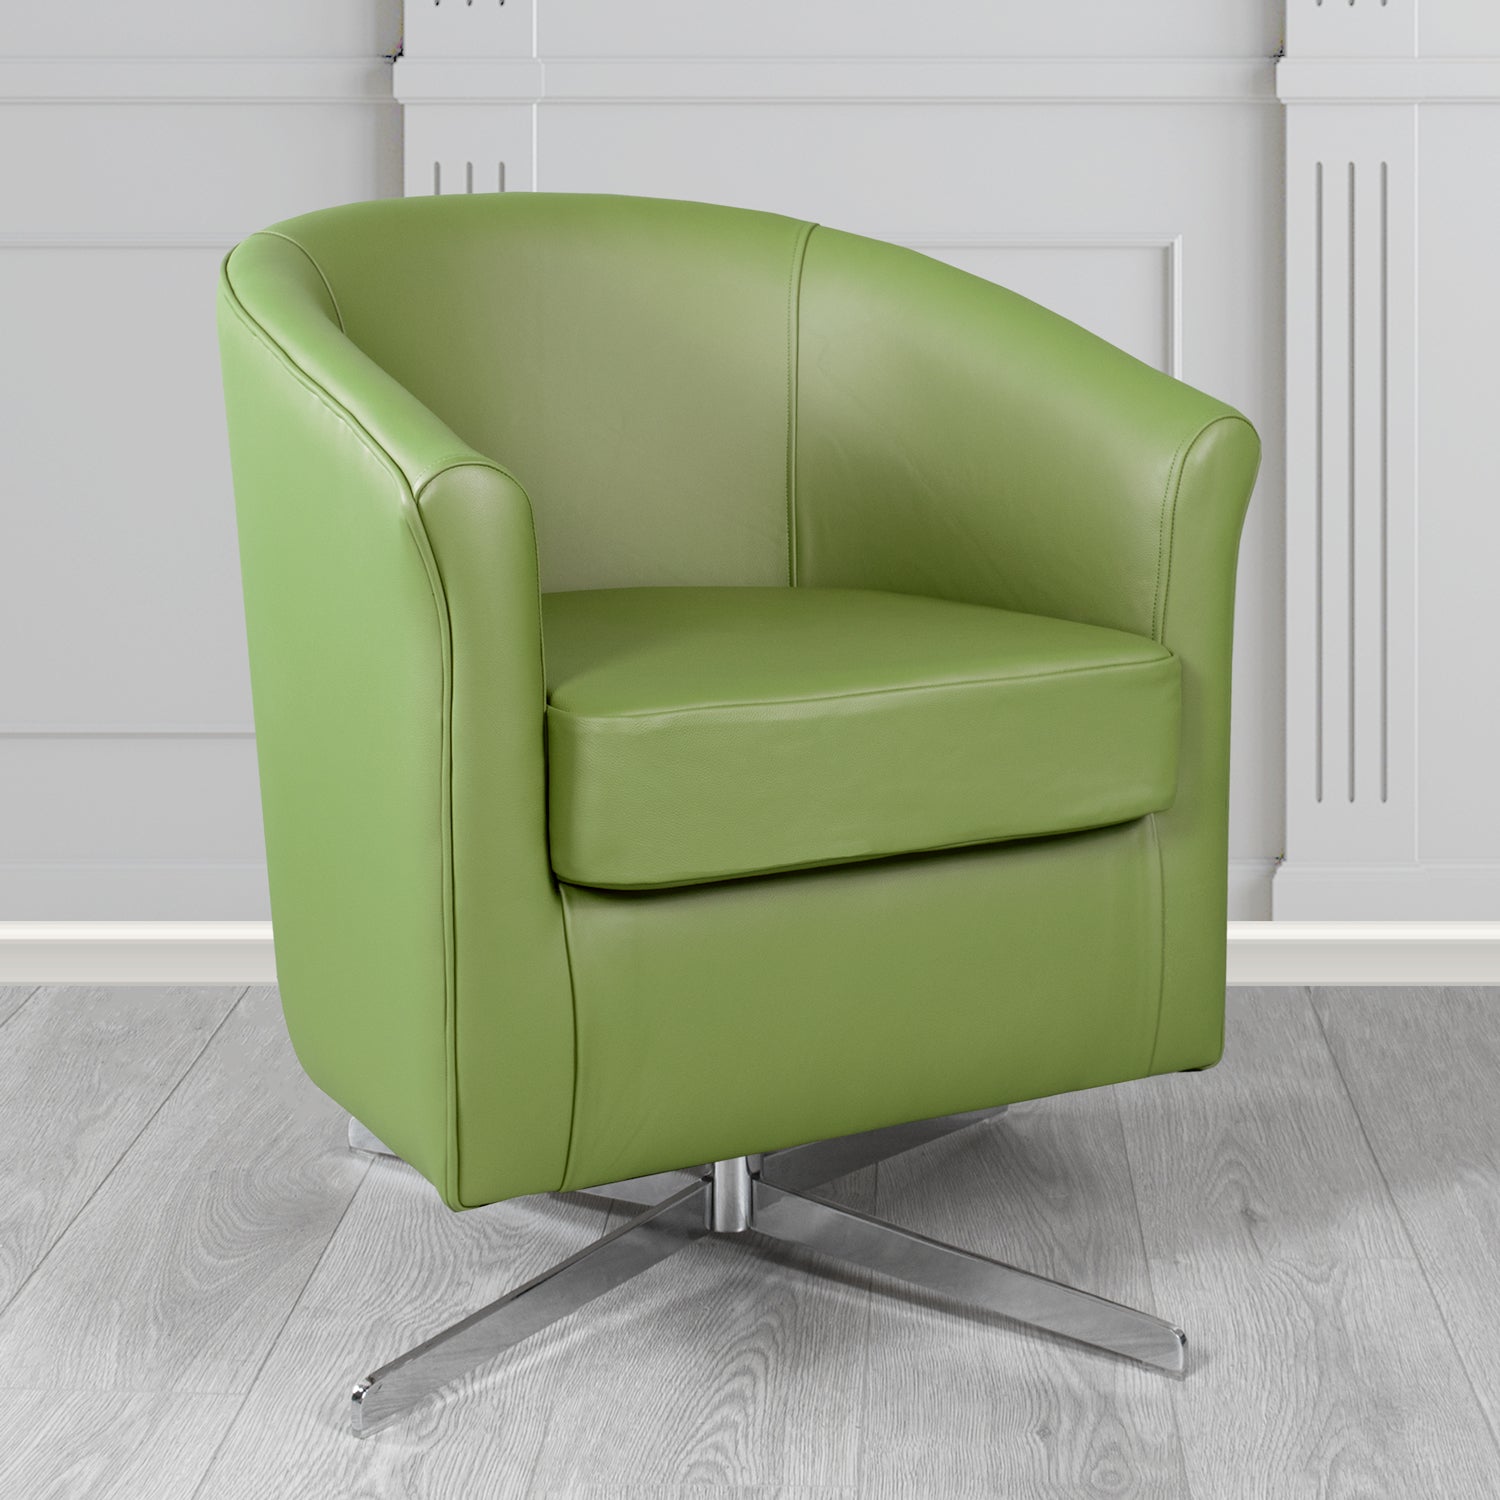 Cannes Swivel Tub Chair in Shelly Mountain Tree Crib 5 Genuine Leather - The Tub Chair Shop